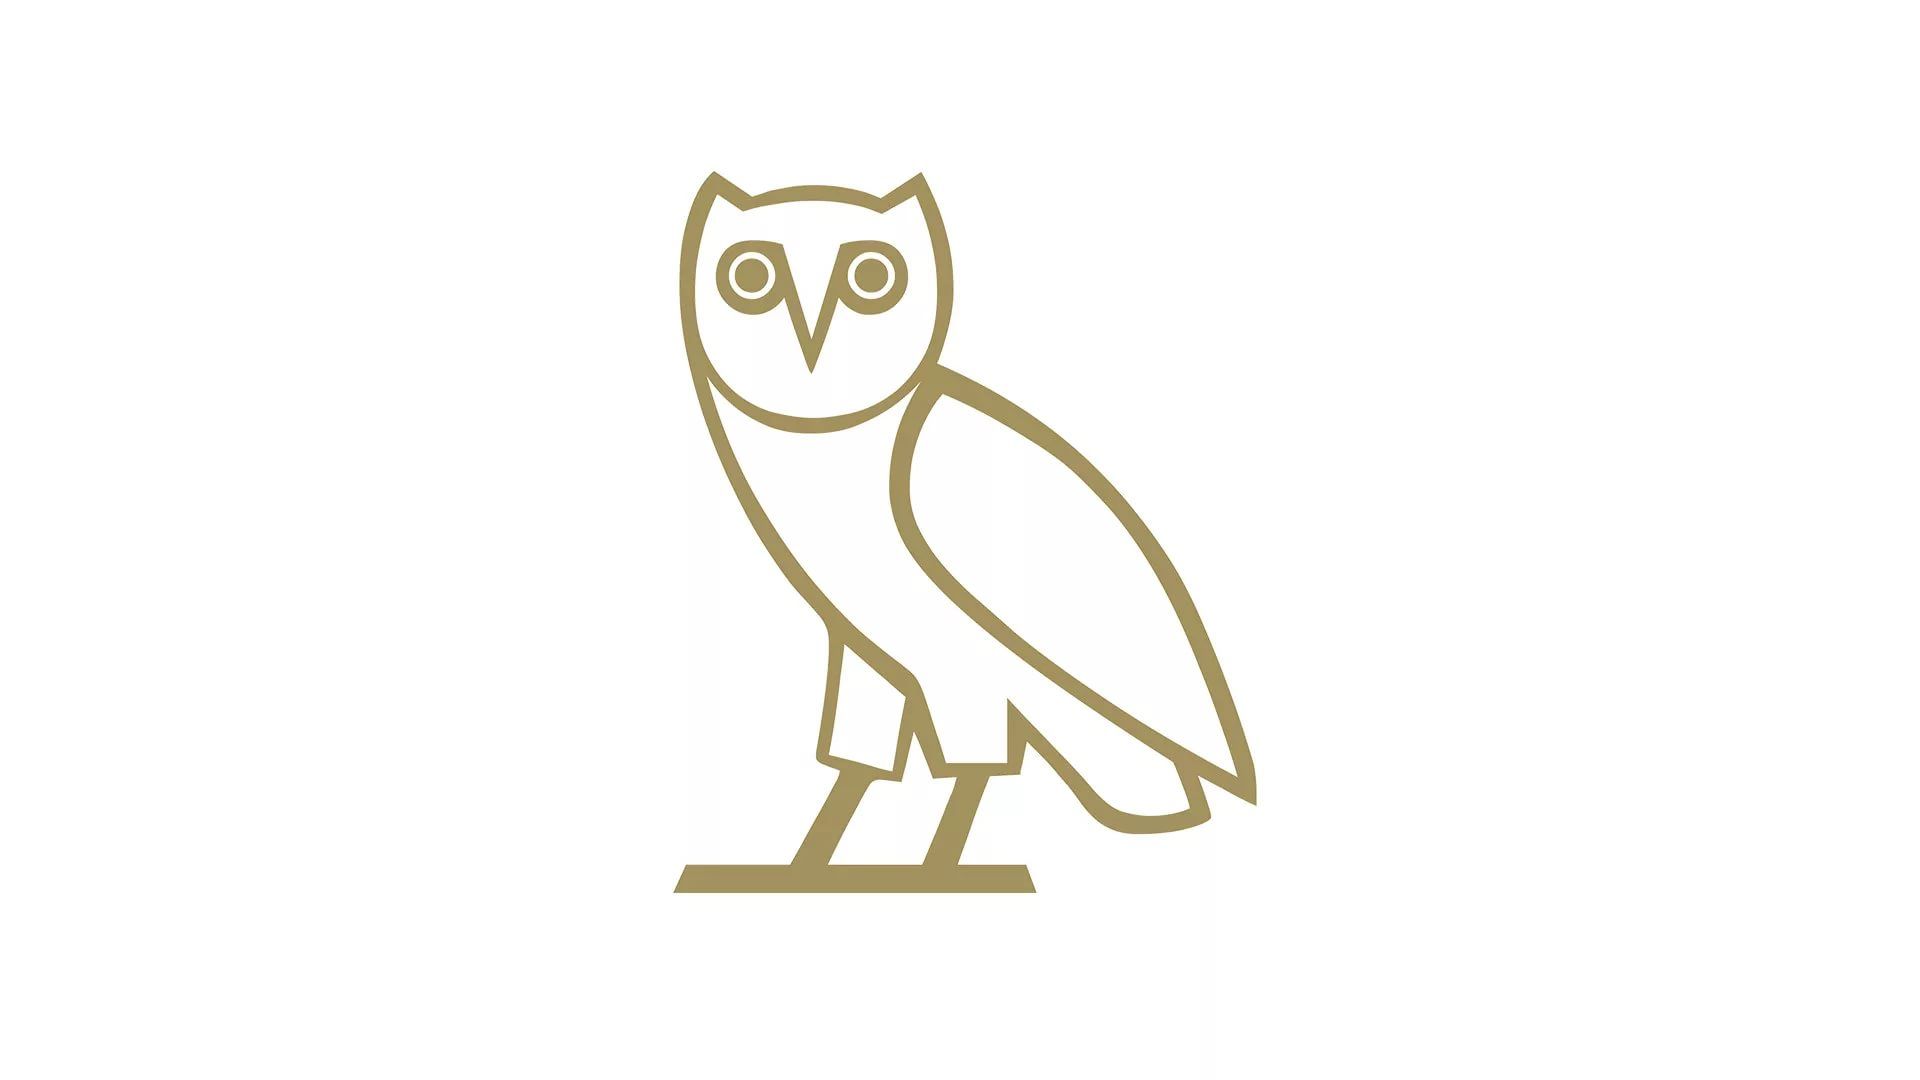 Ovo Wallpapers